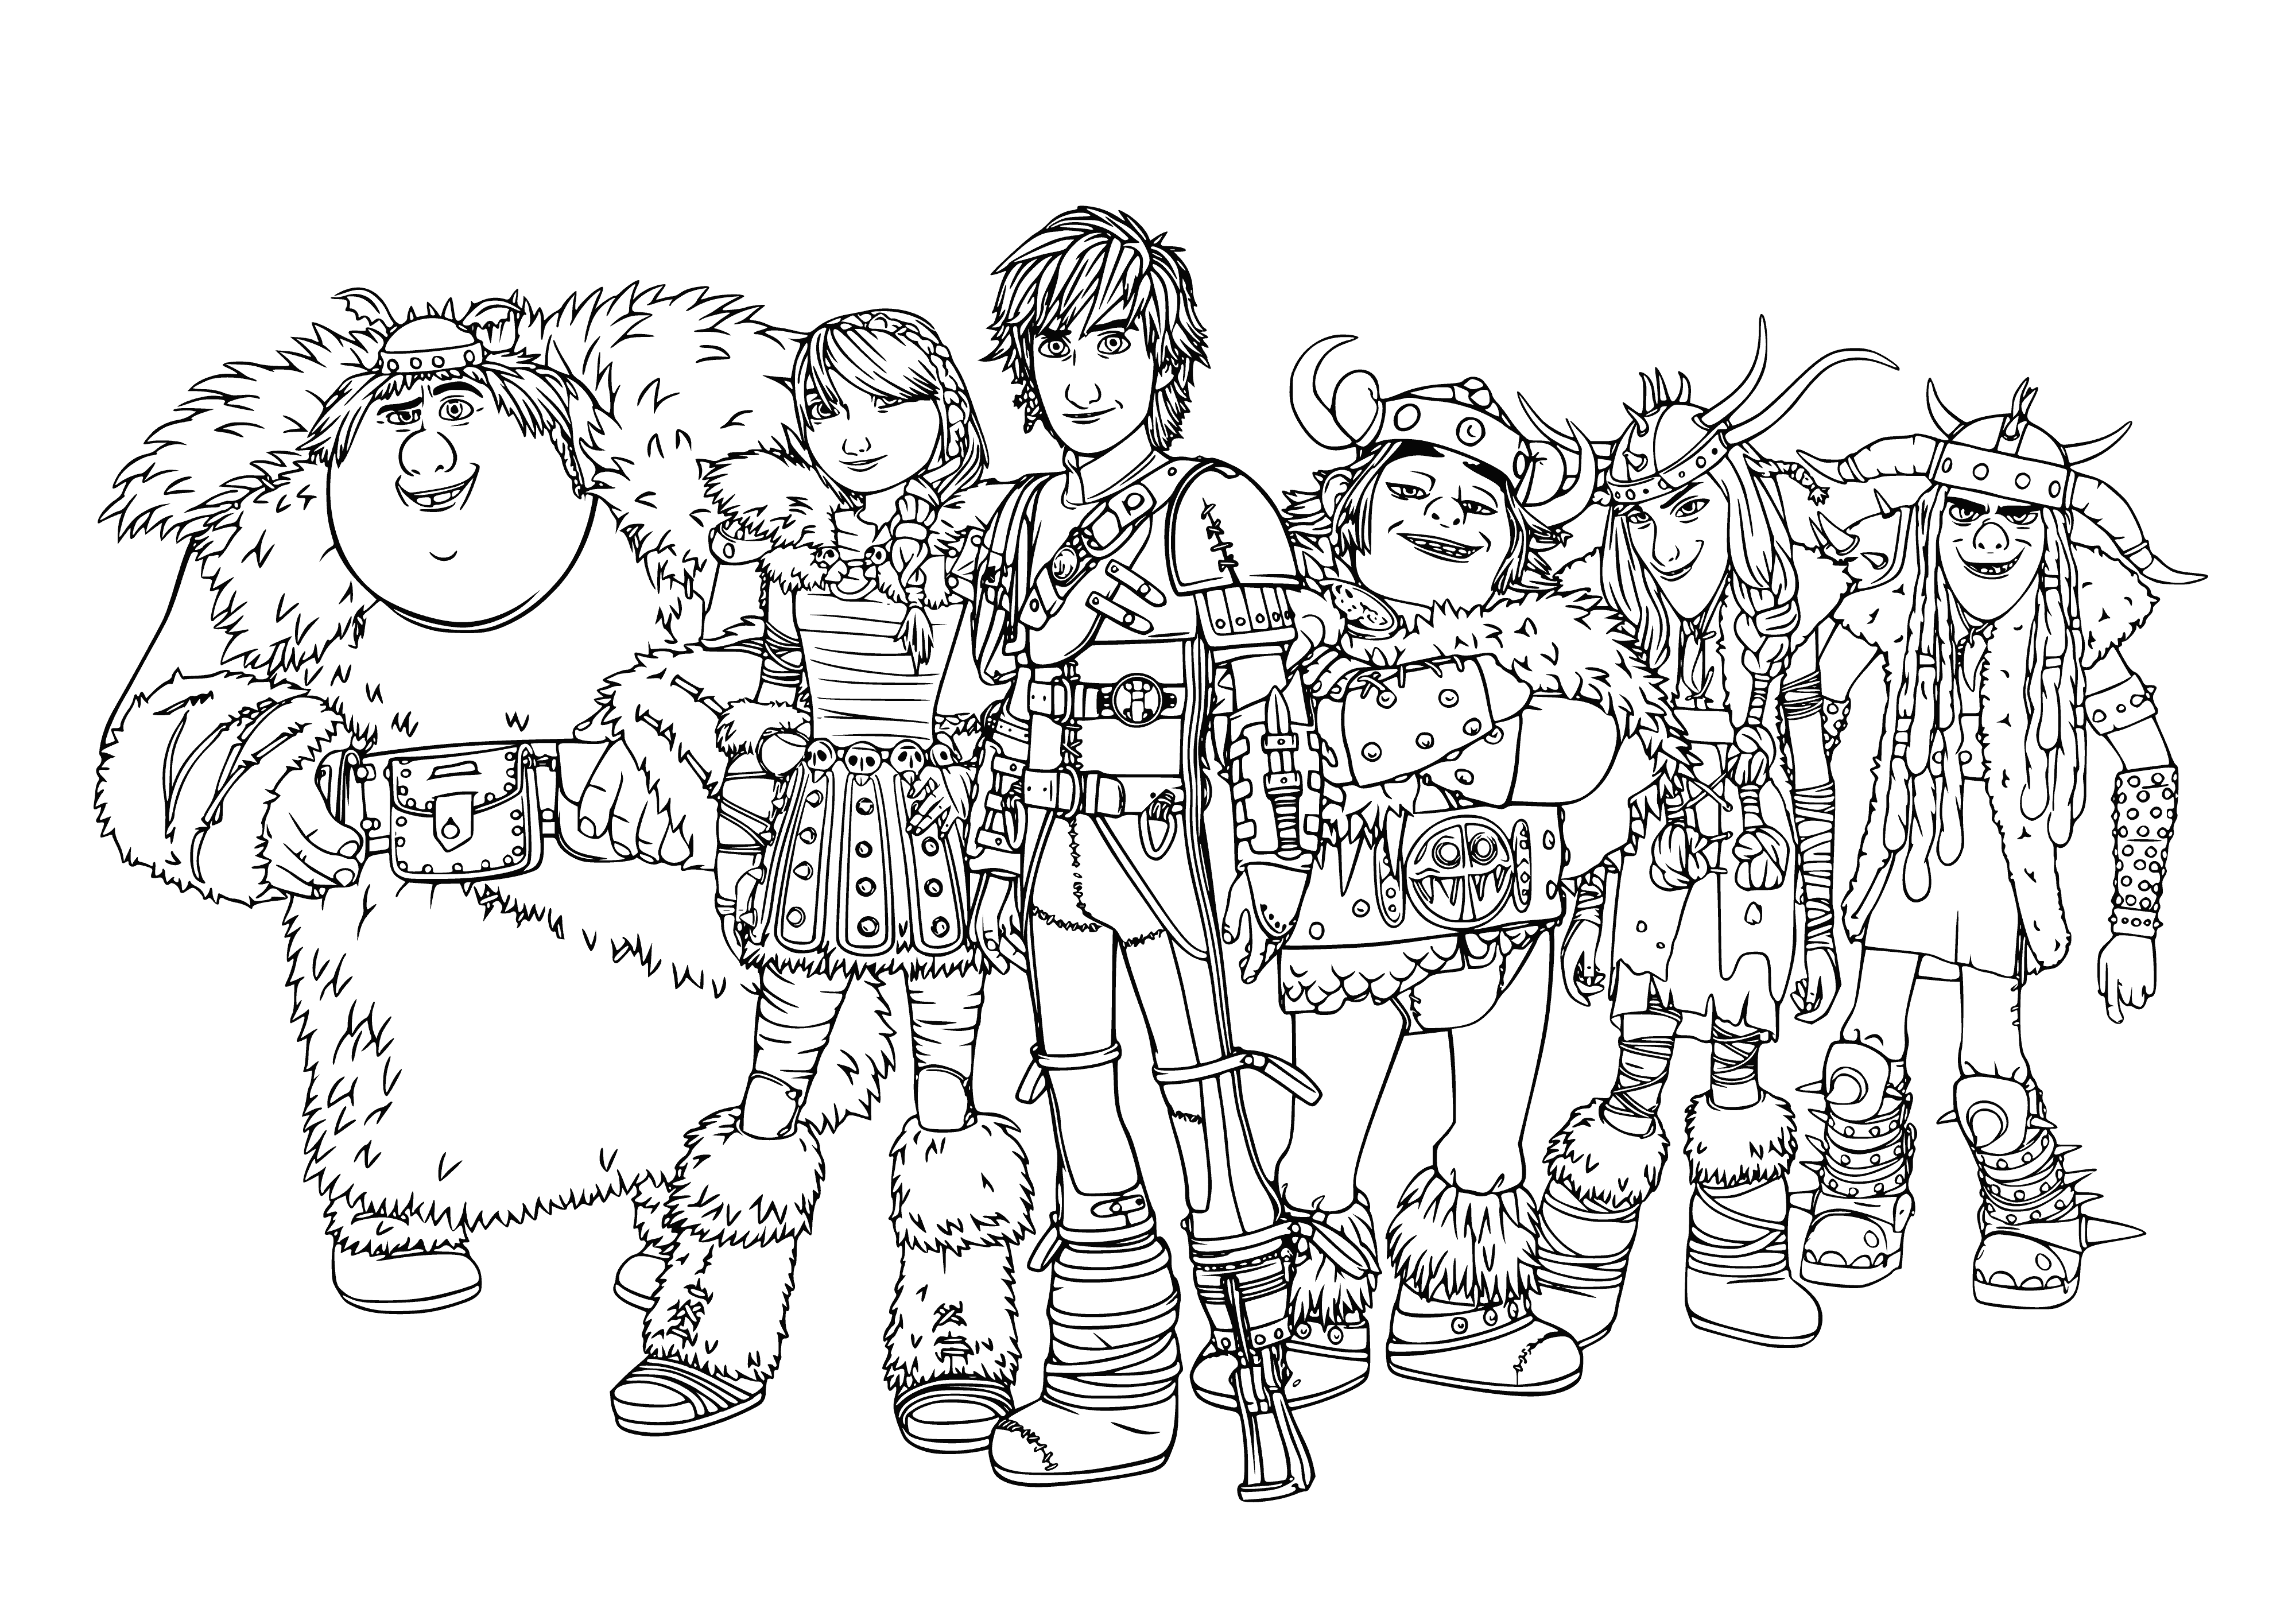 coloring page: Dragon Riders led by Hiccup tame dragons to protect their village & help with tasks too difficult or dangerous for humans.